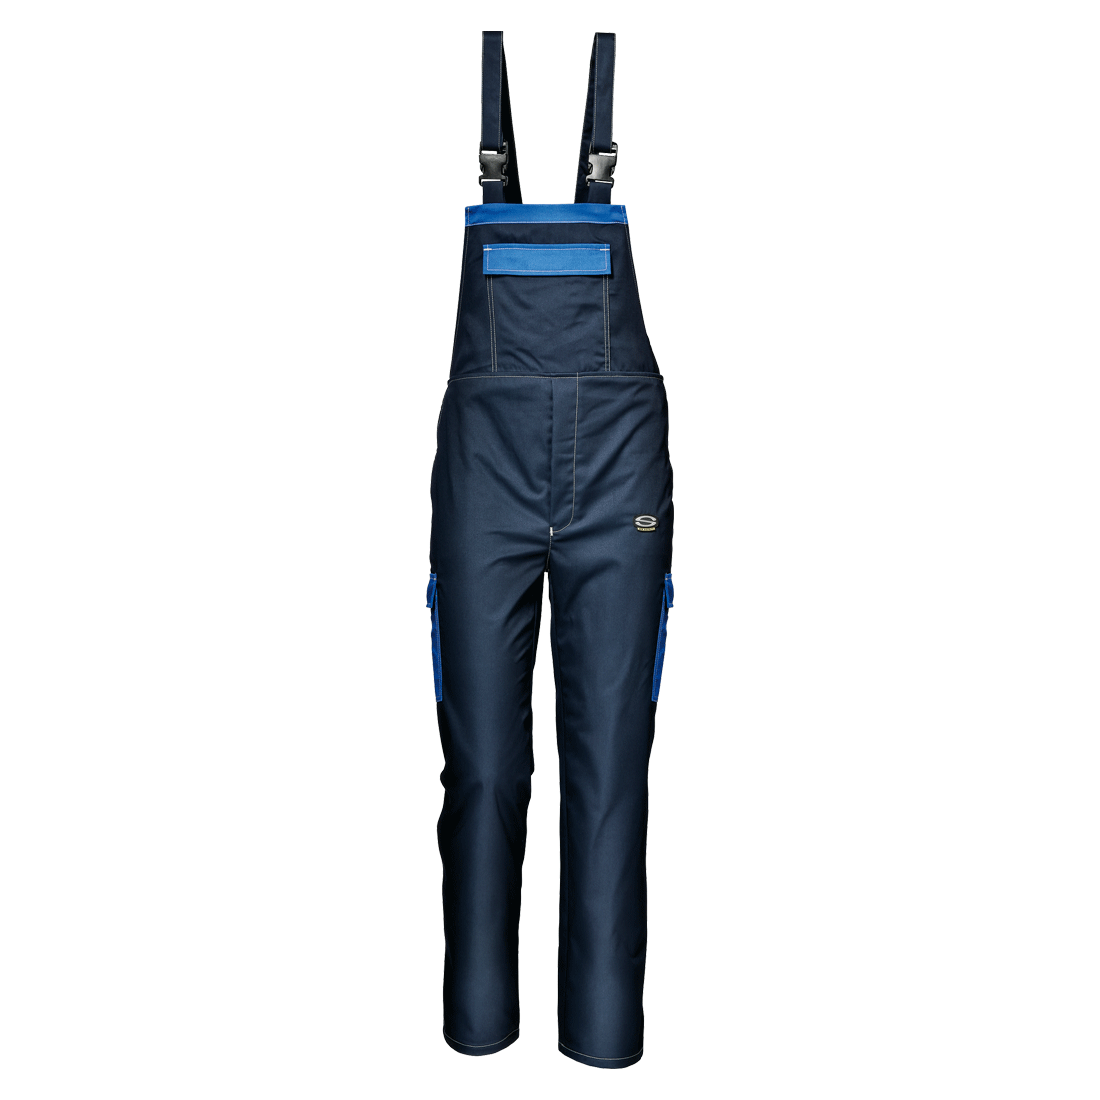 Western Rise Evolution Pant Review | Pack Hacker